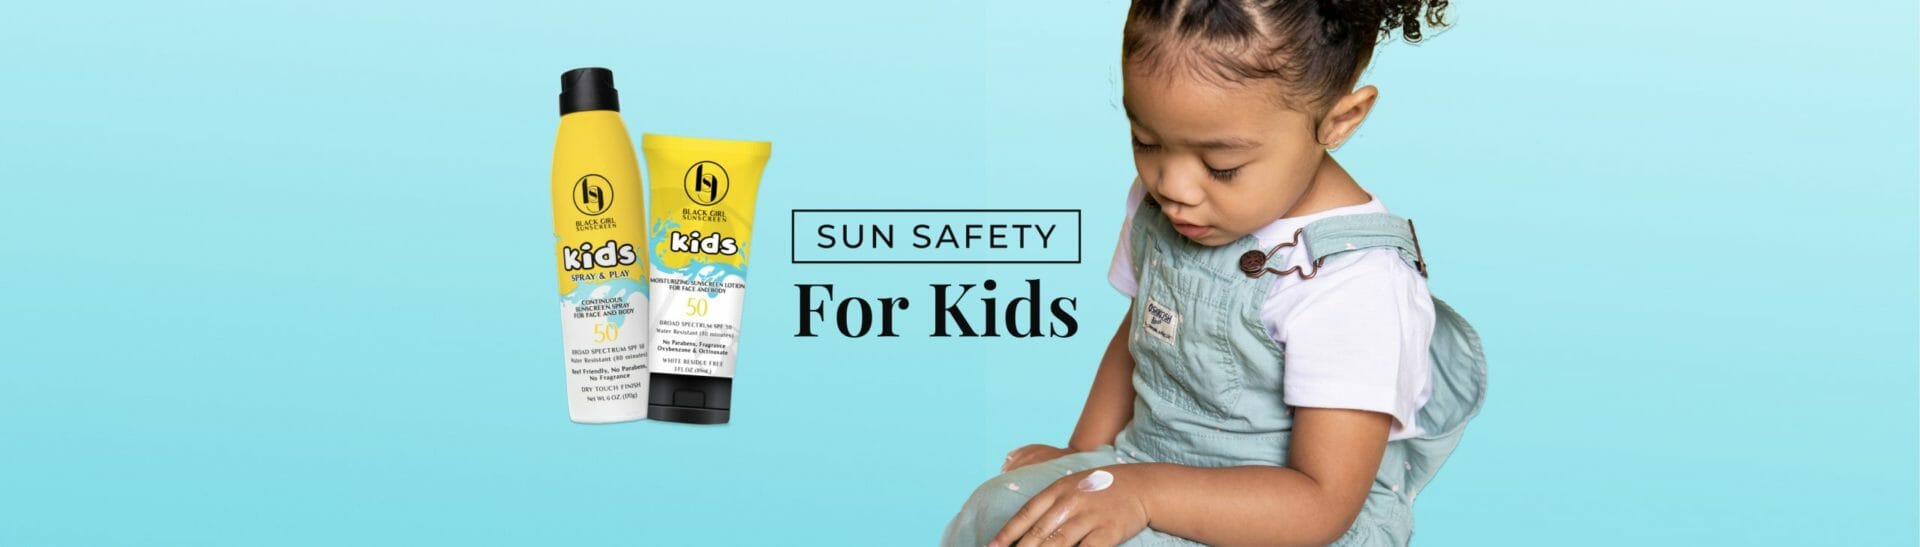 Important Sun Safety Tips for Kids